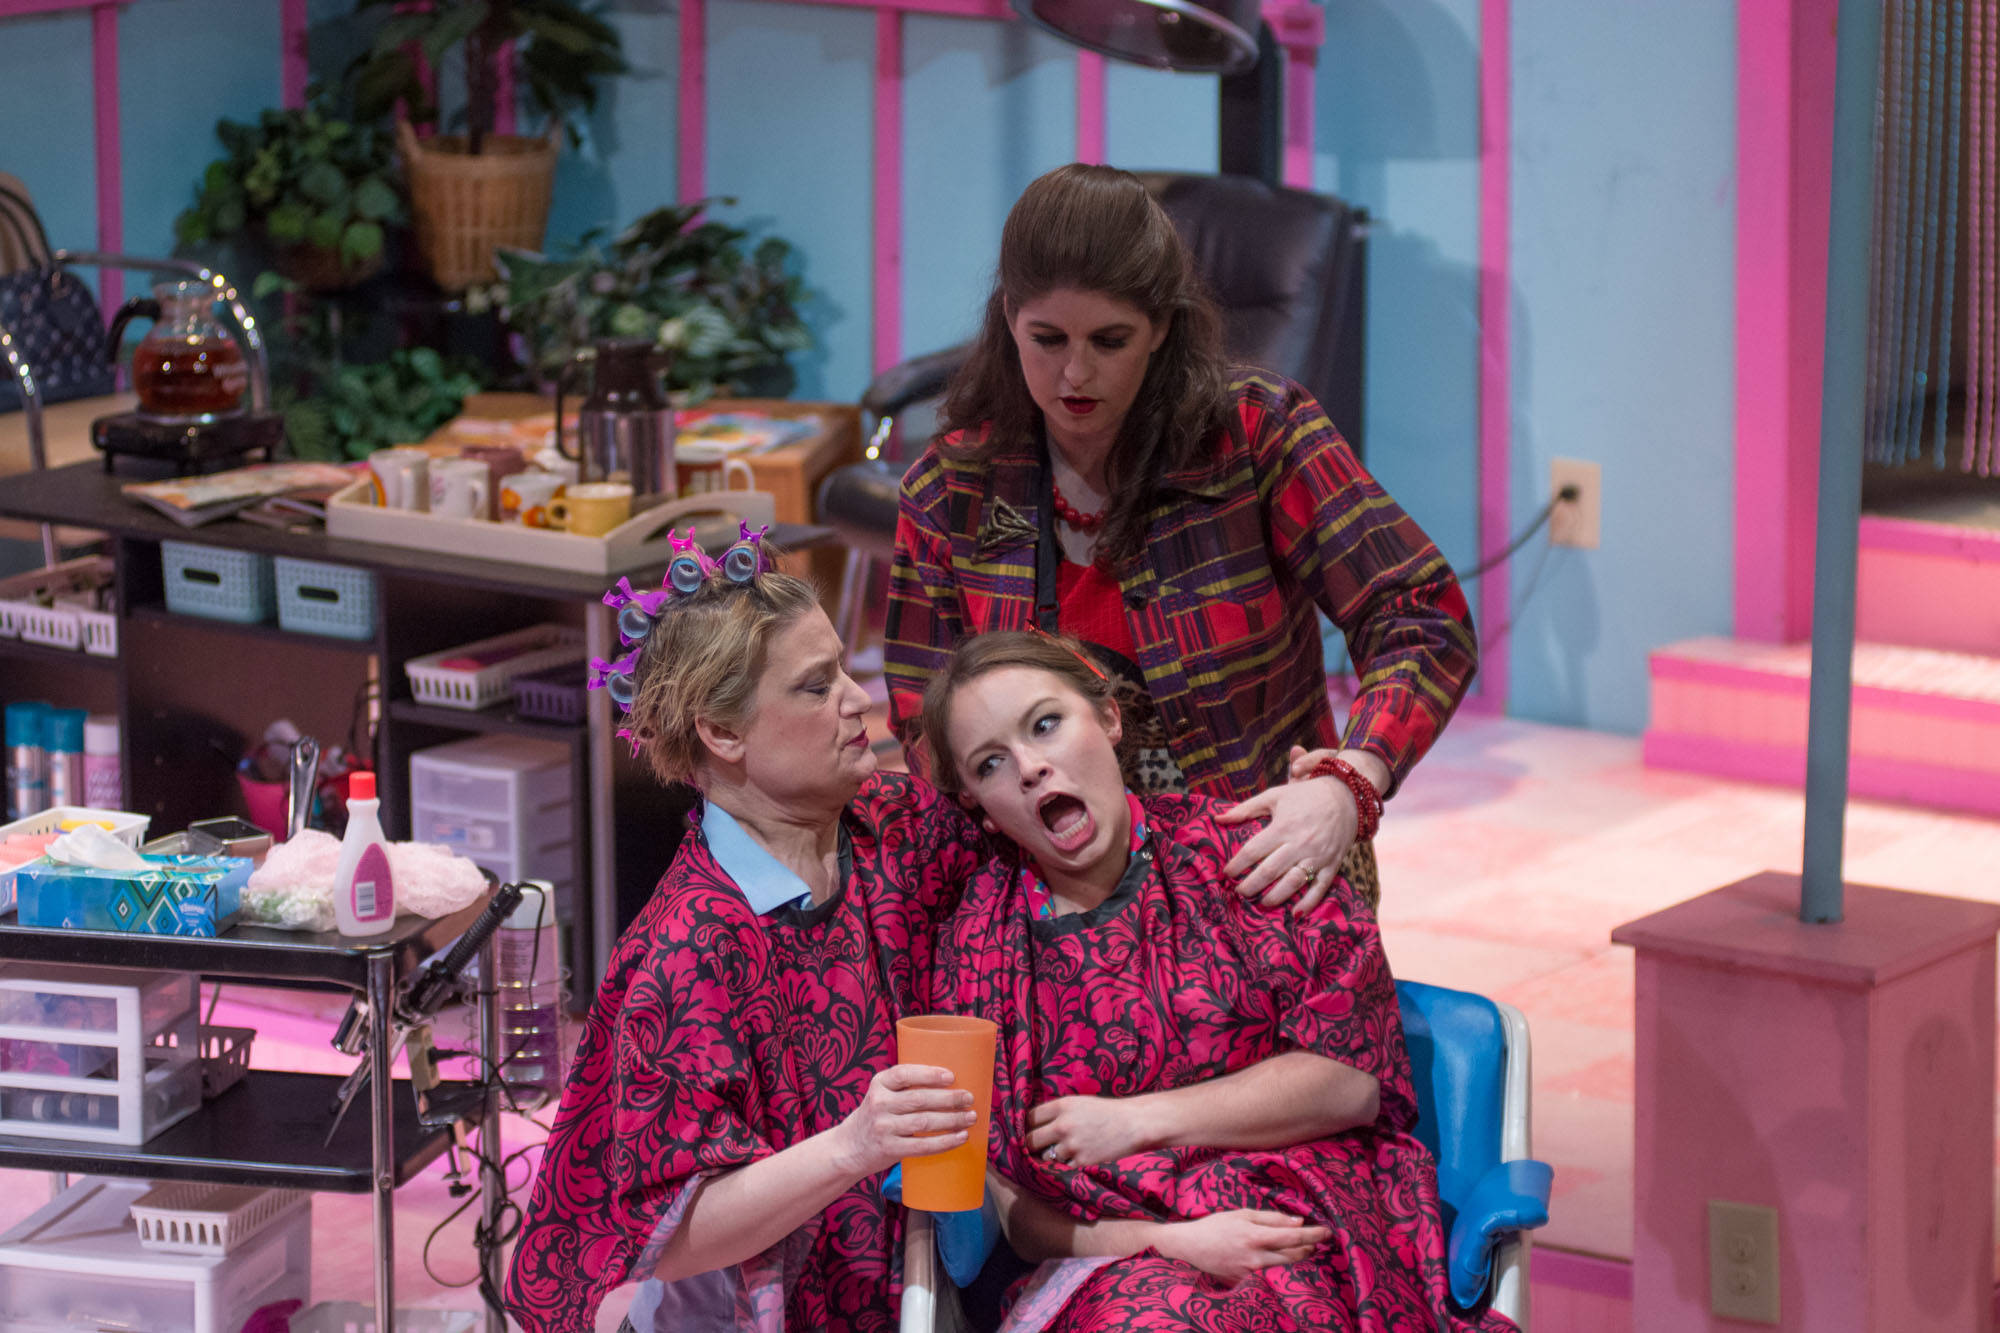 Katie Jensen as M’Lynn, Stacy Stout Katasse as Truvy, and Naomi Prentice as Shelby in Perseverance Theatre’s production of “Steel Magnolias.” (Photo by Cameron Byrnes)